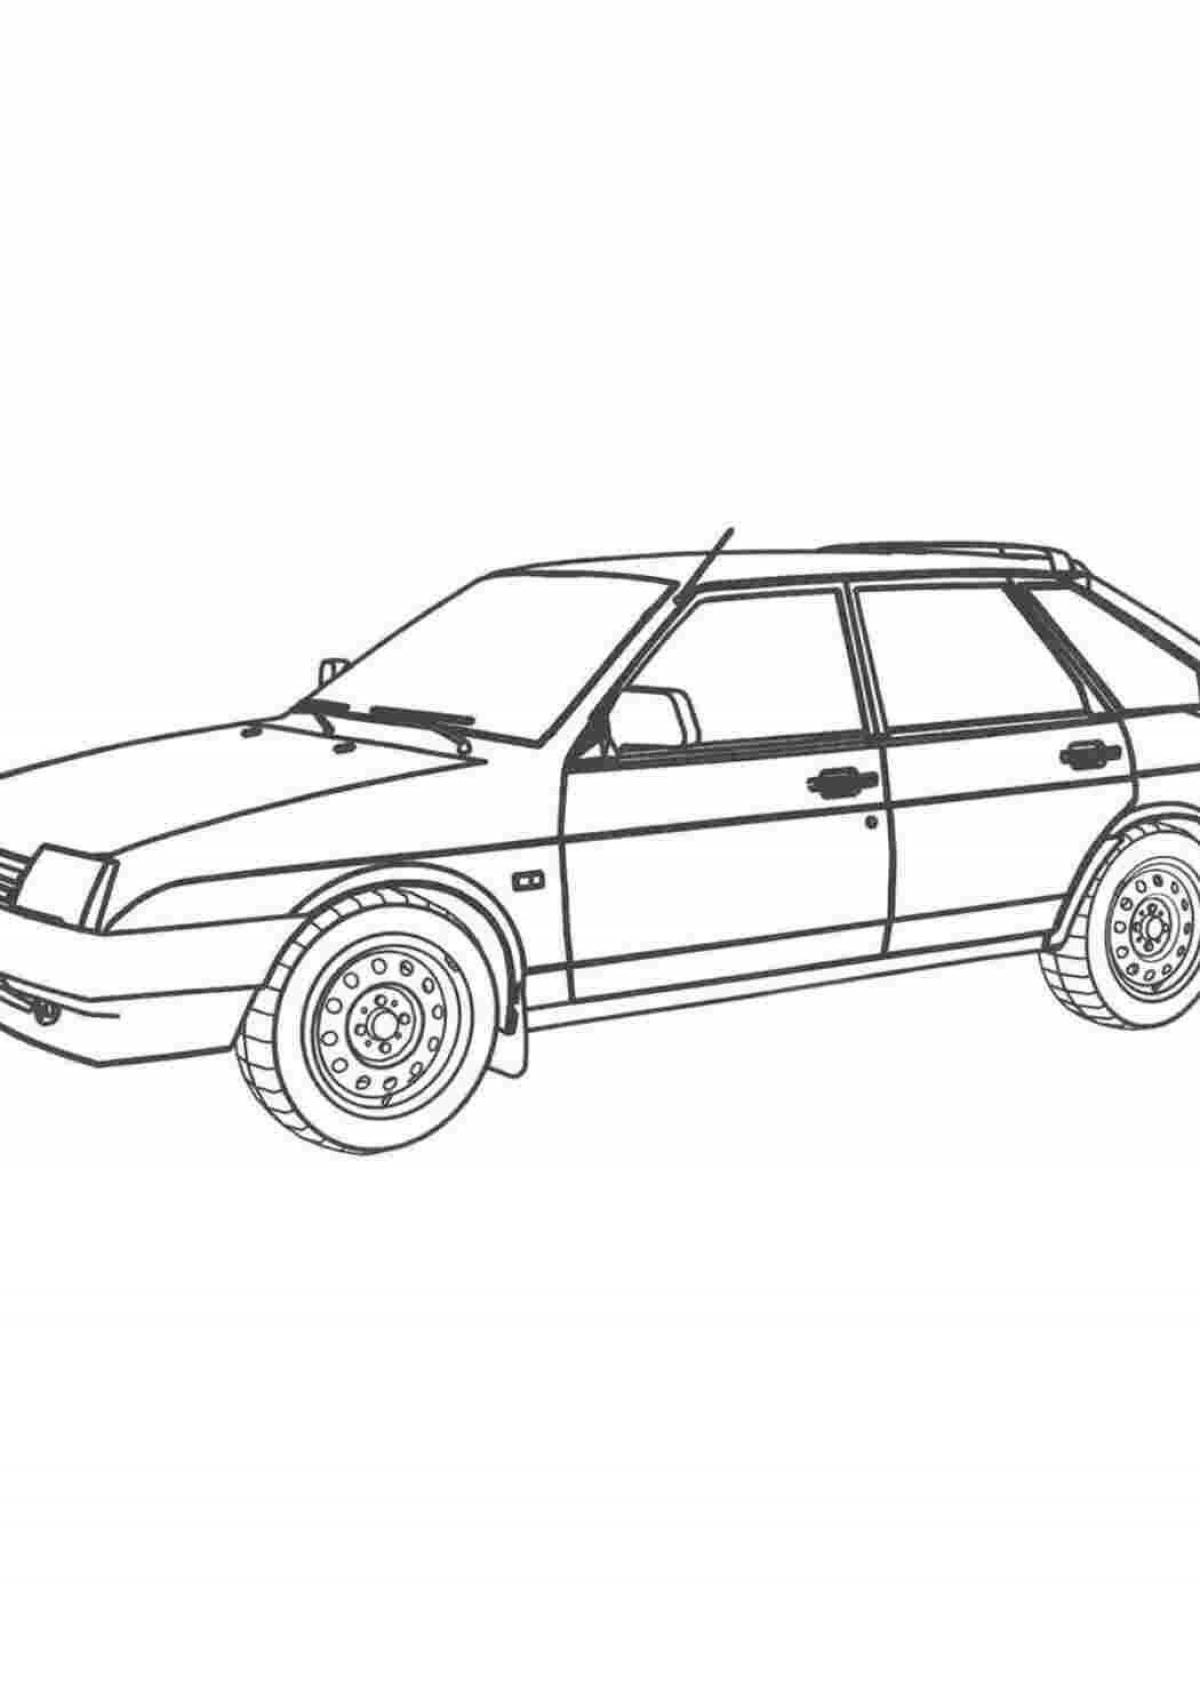 Coloring page blessed vaz 2111